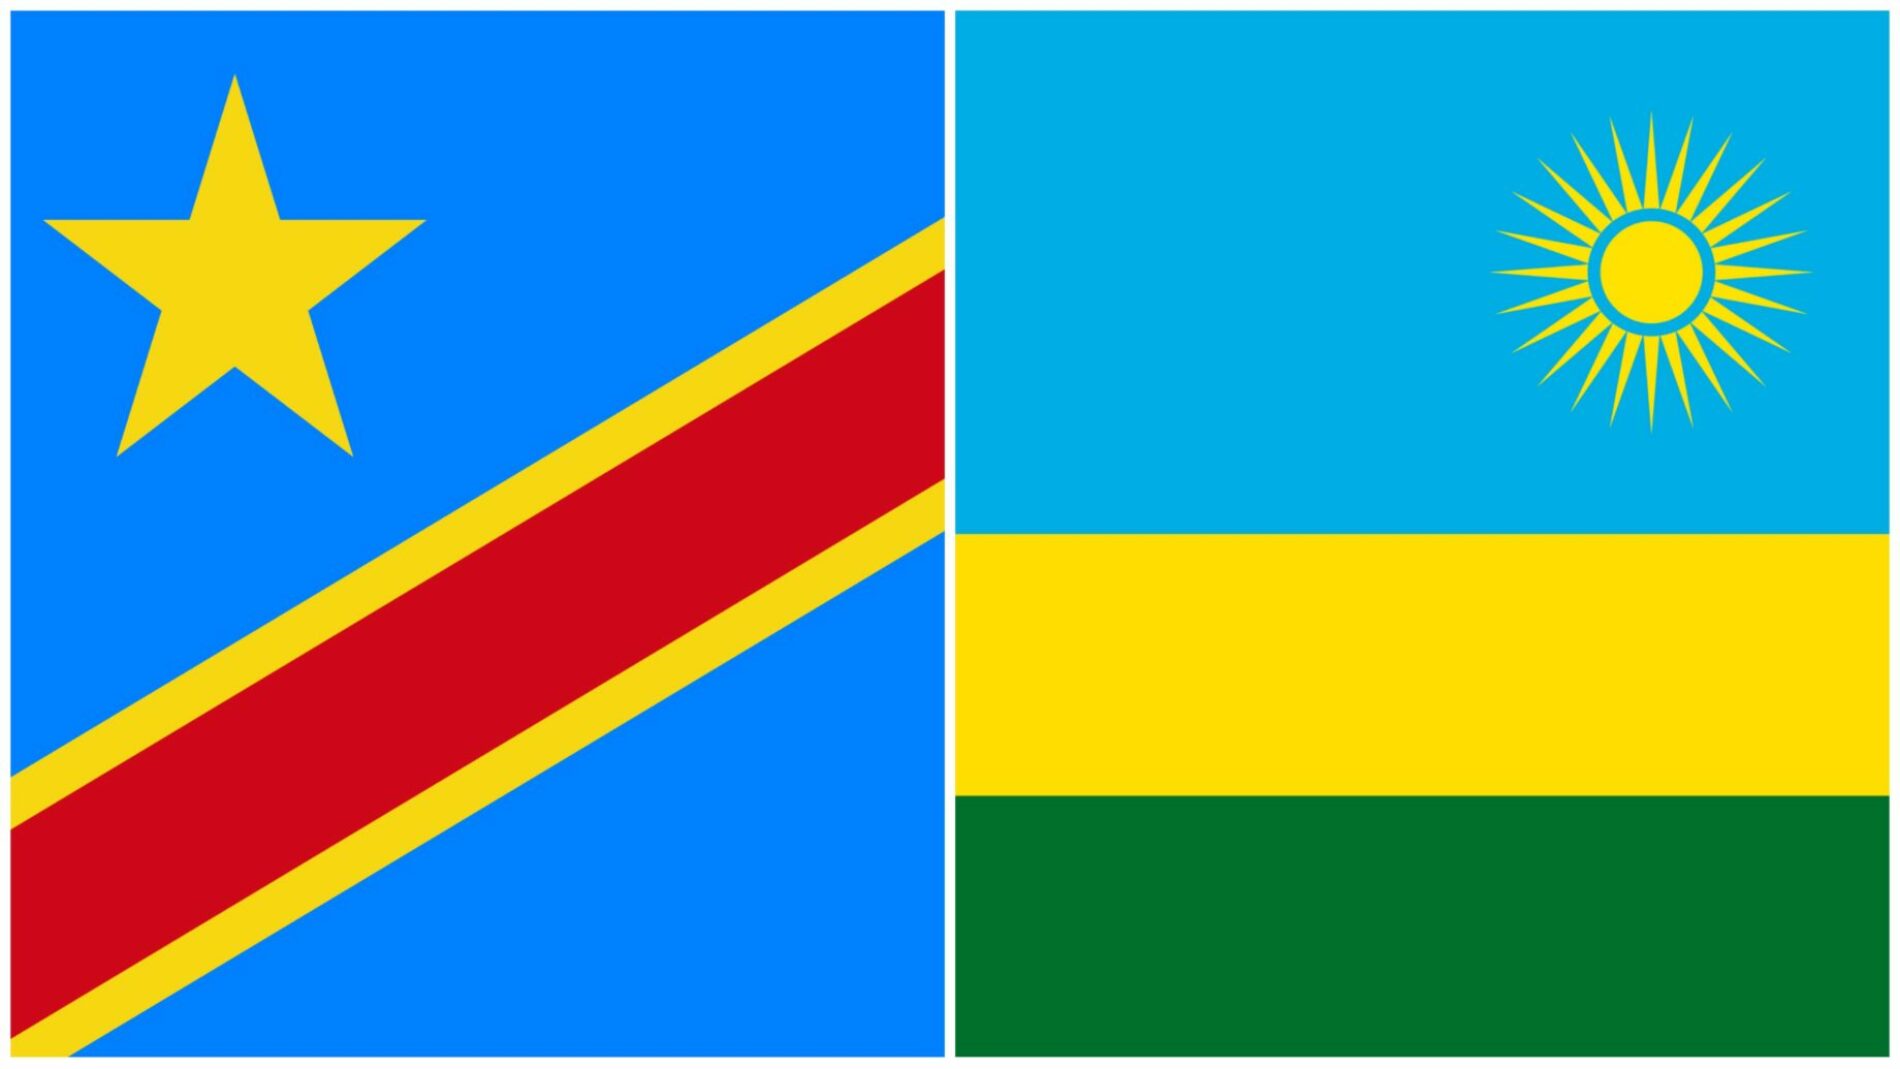 Rwanda-DRC: DRC accuses Rwanda of planning a massacre of Congolese Tutsis in order to find an alibi to invade (press release)